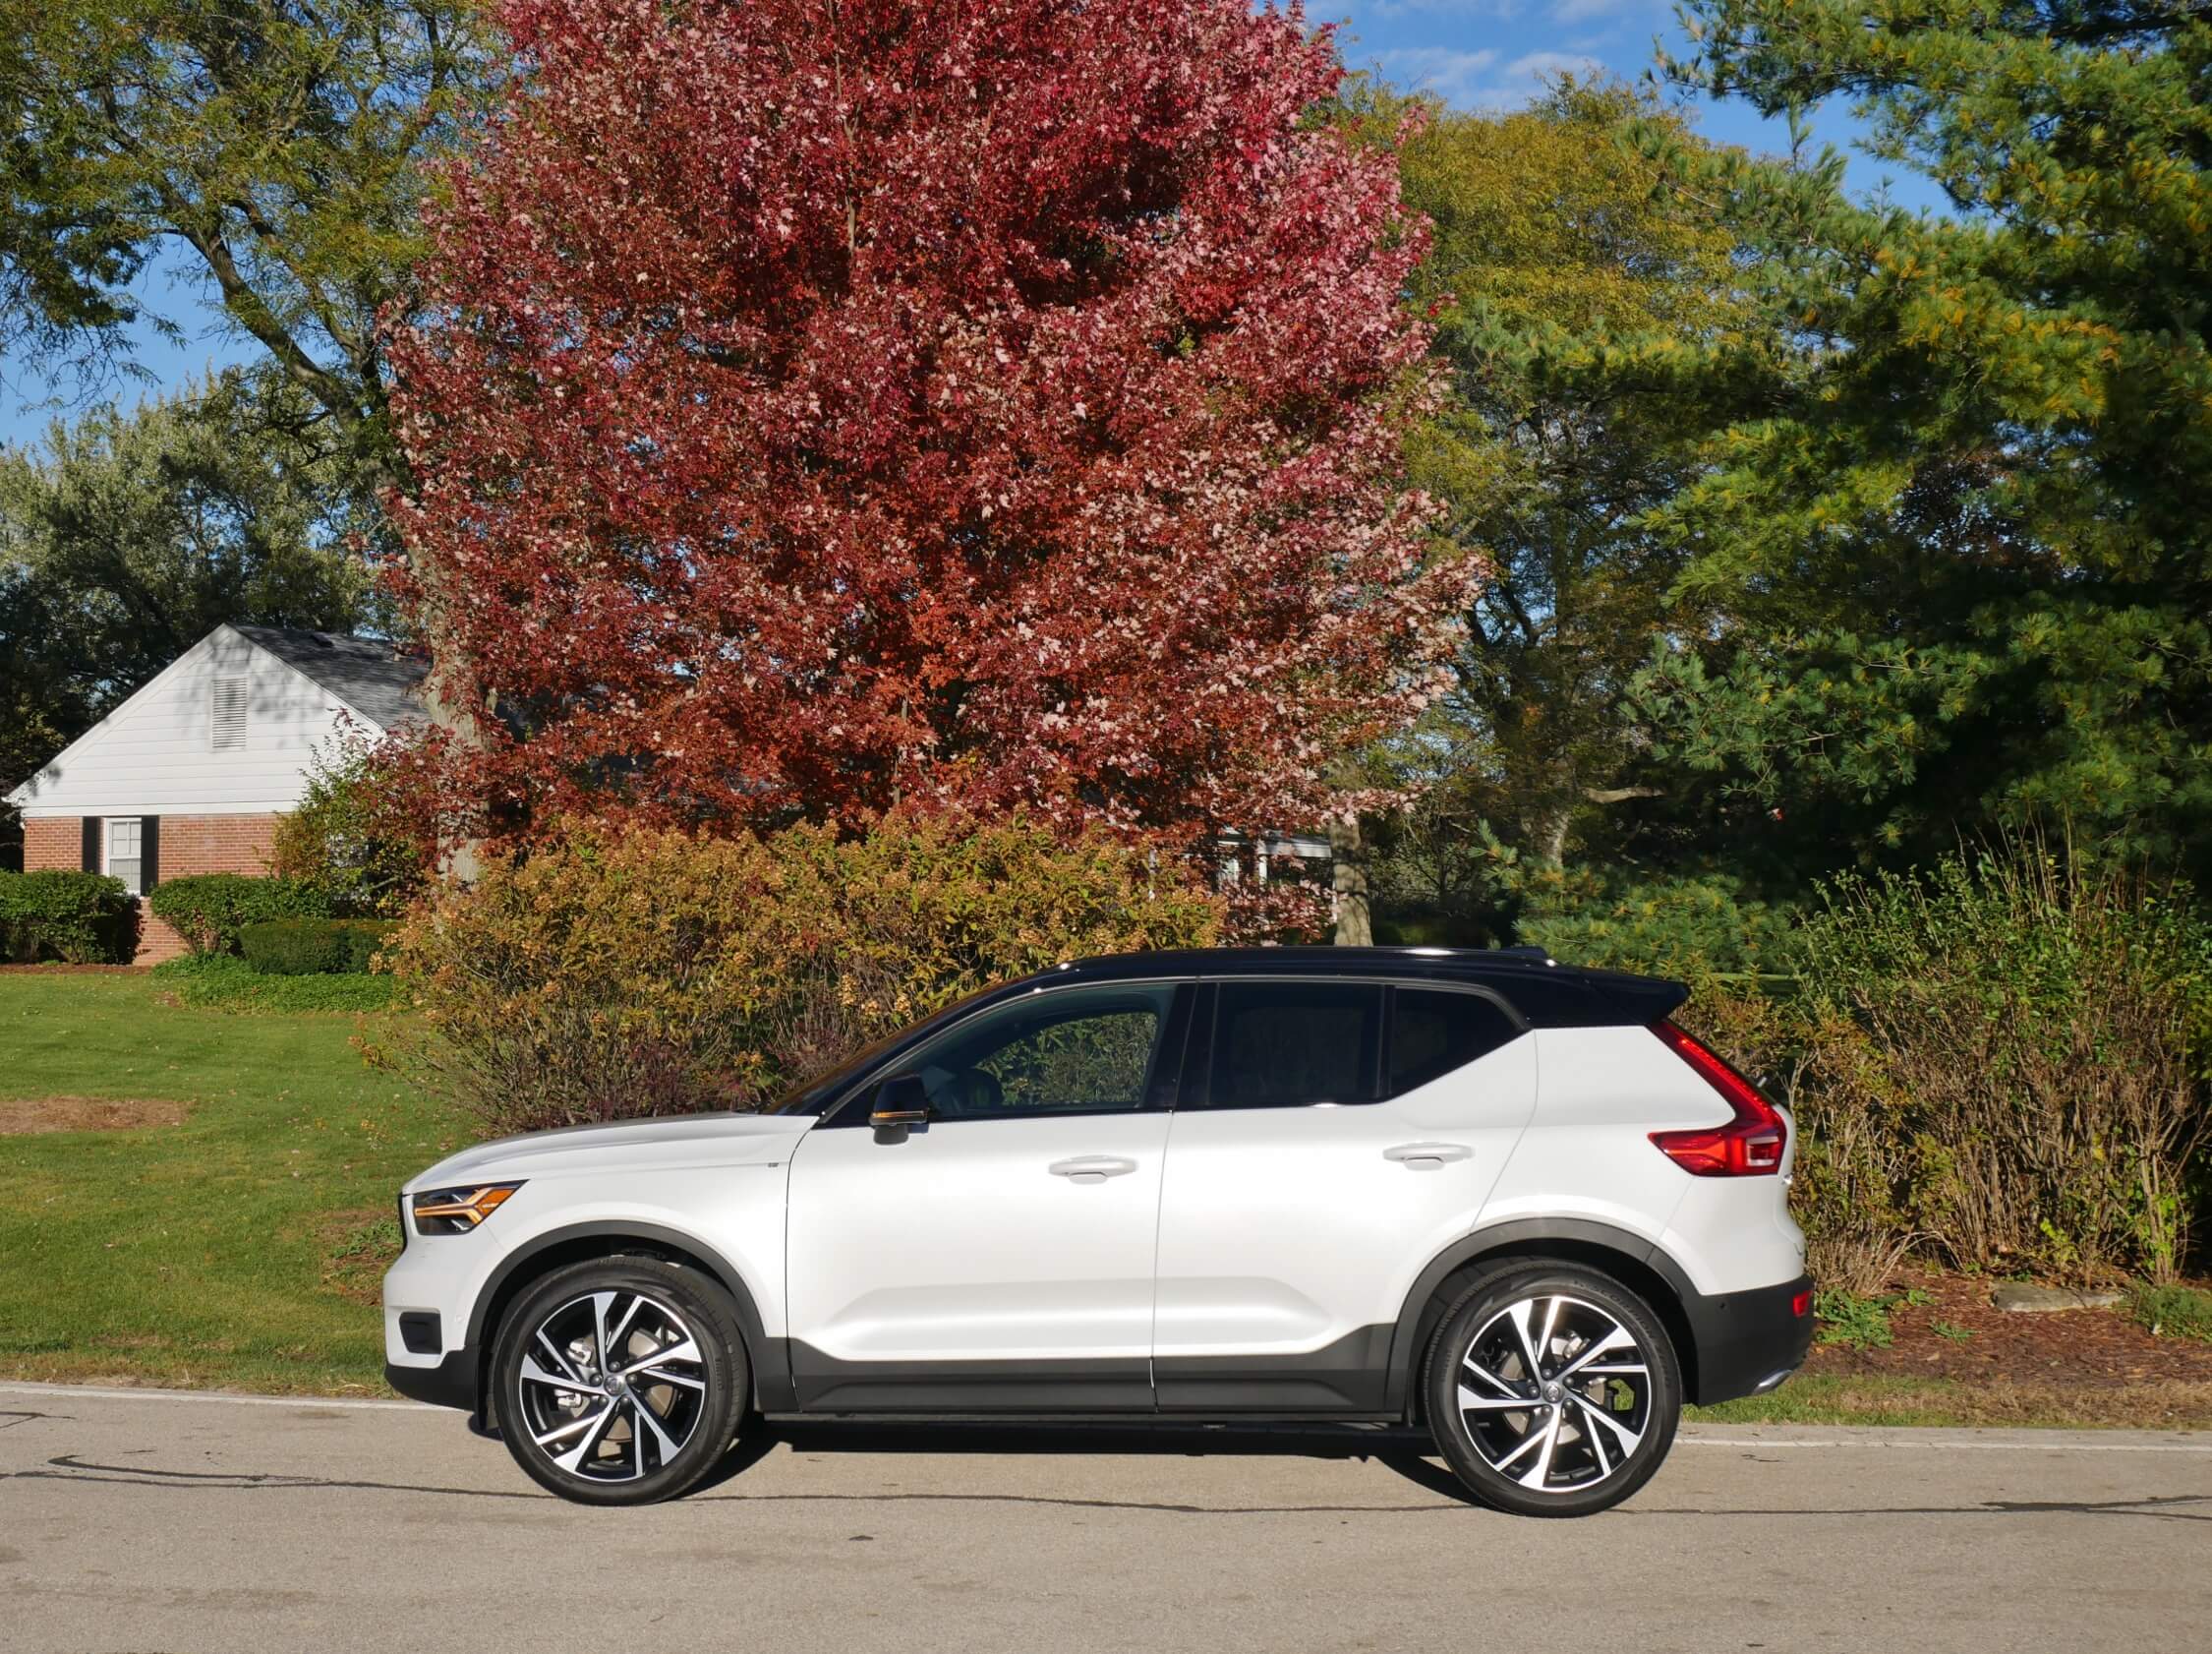 2019 Volvo XC40 T5 R-Design: Two tones of Crystal White Metallic and darkened spill-over roof = floating roof.